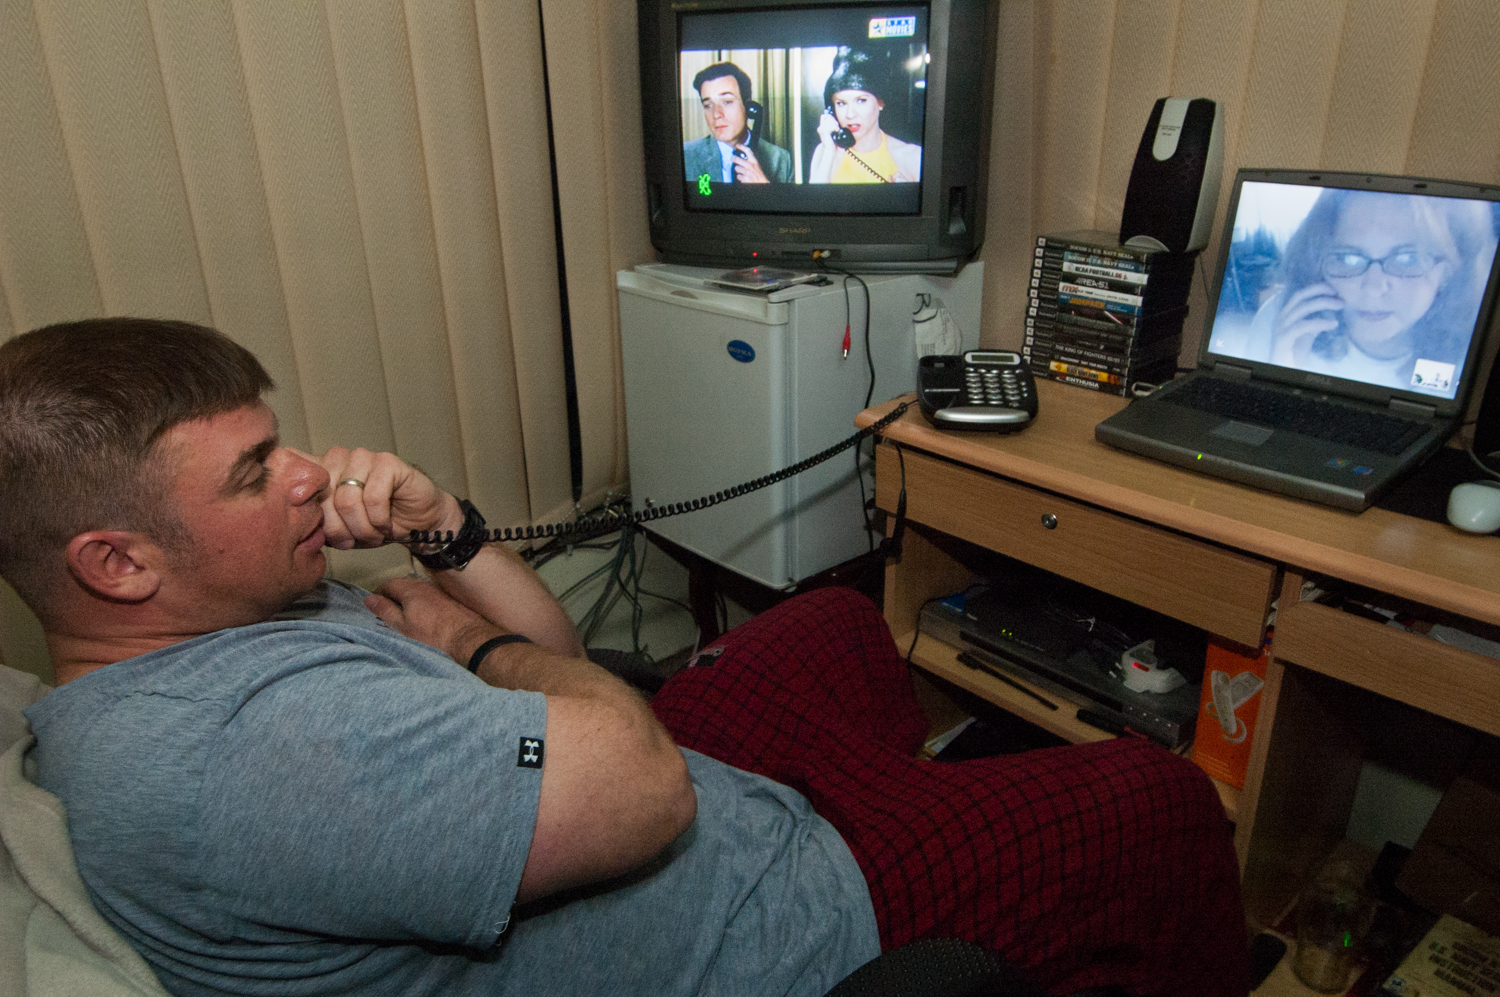  Private security contractor, Mike Stocksett, talks to his wife via internet video connection in his room at a company compound in Kabul, Afghanistan. Stocksett, who has been deployed to both Afghanistan and Iraq, says he has watched his young son gr